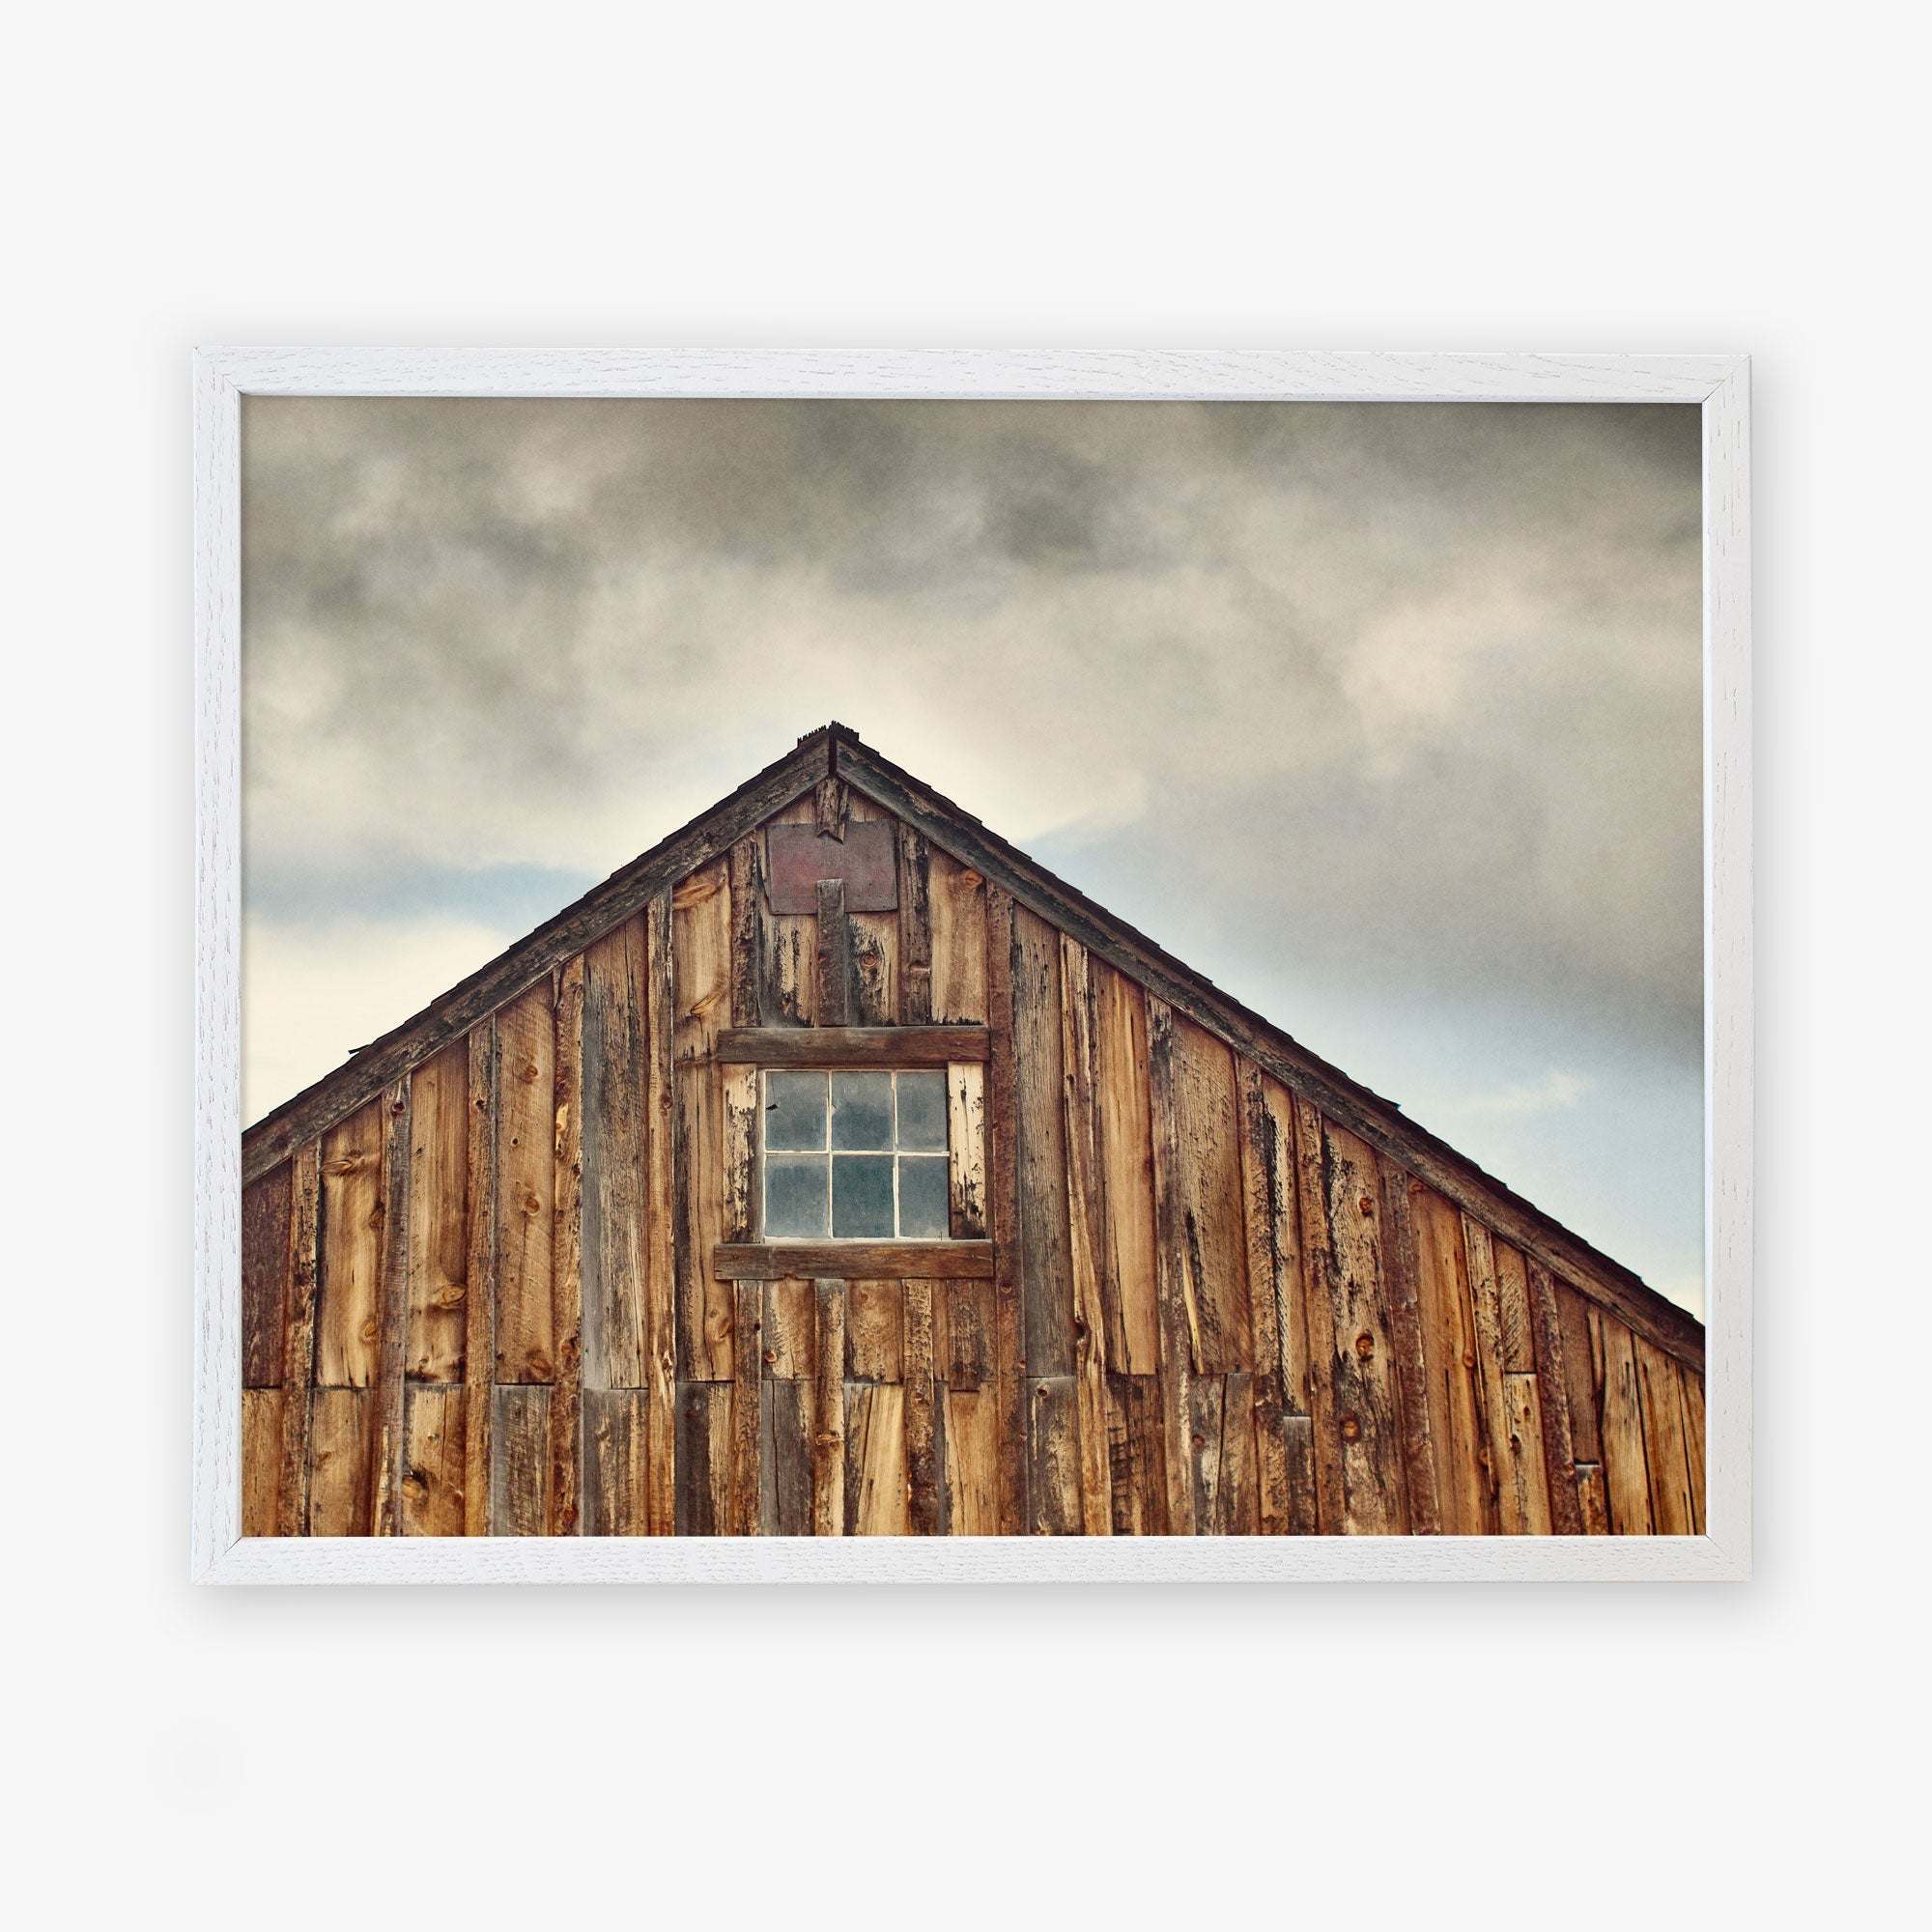 A framed photograph of an old wooden barn with weathered planks under a cloudy sky. The Offley Green &#39;Old Barn at Bodie&#39; Farmhouse Rustic Print has a small window and triangular roof peak.